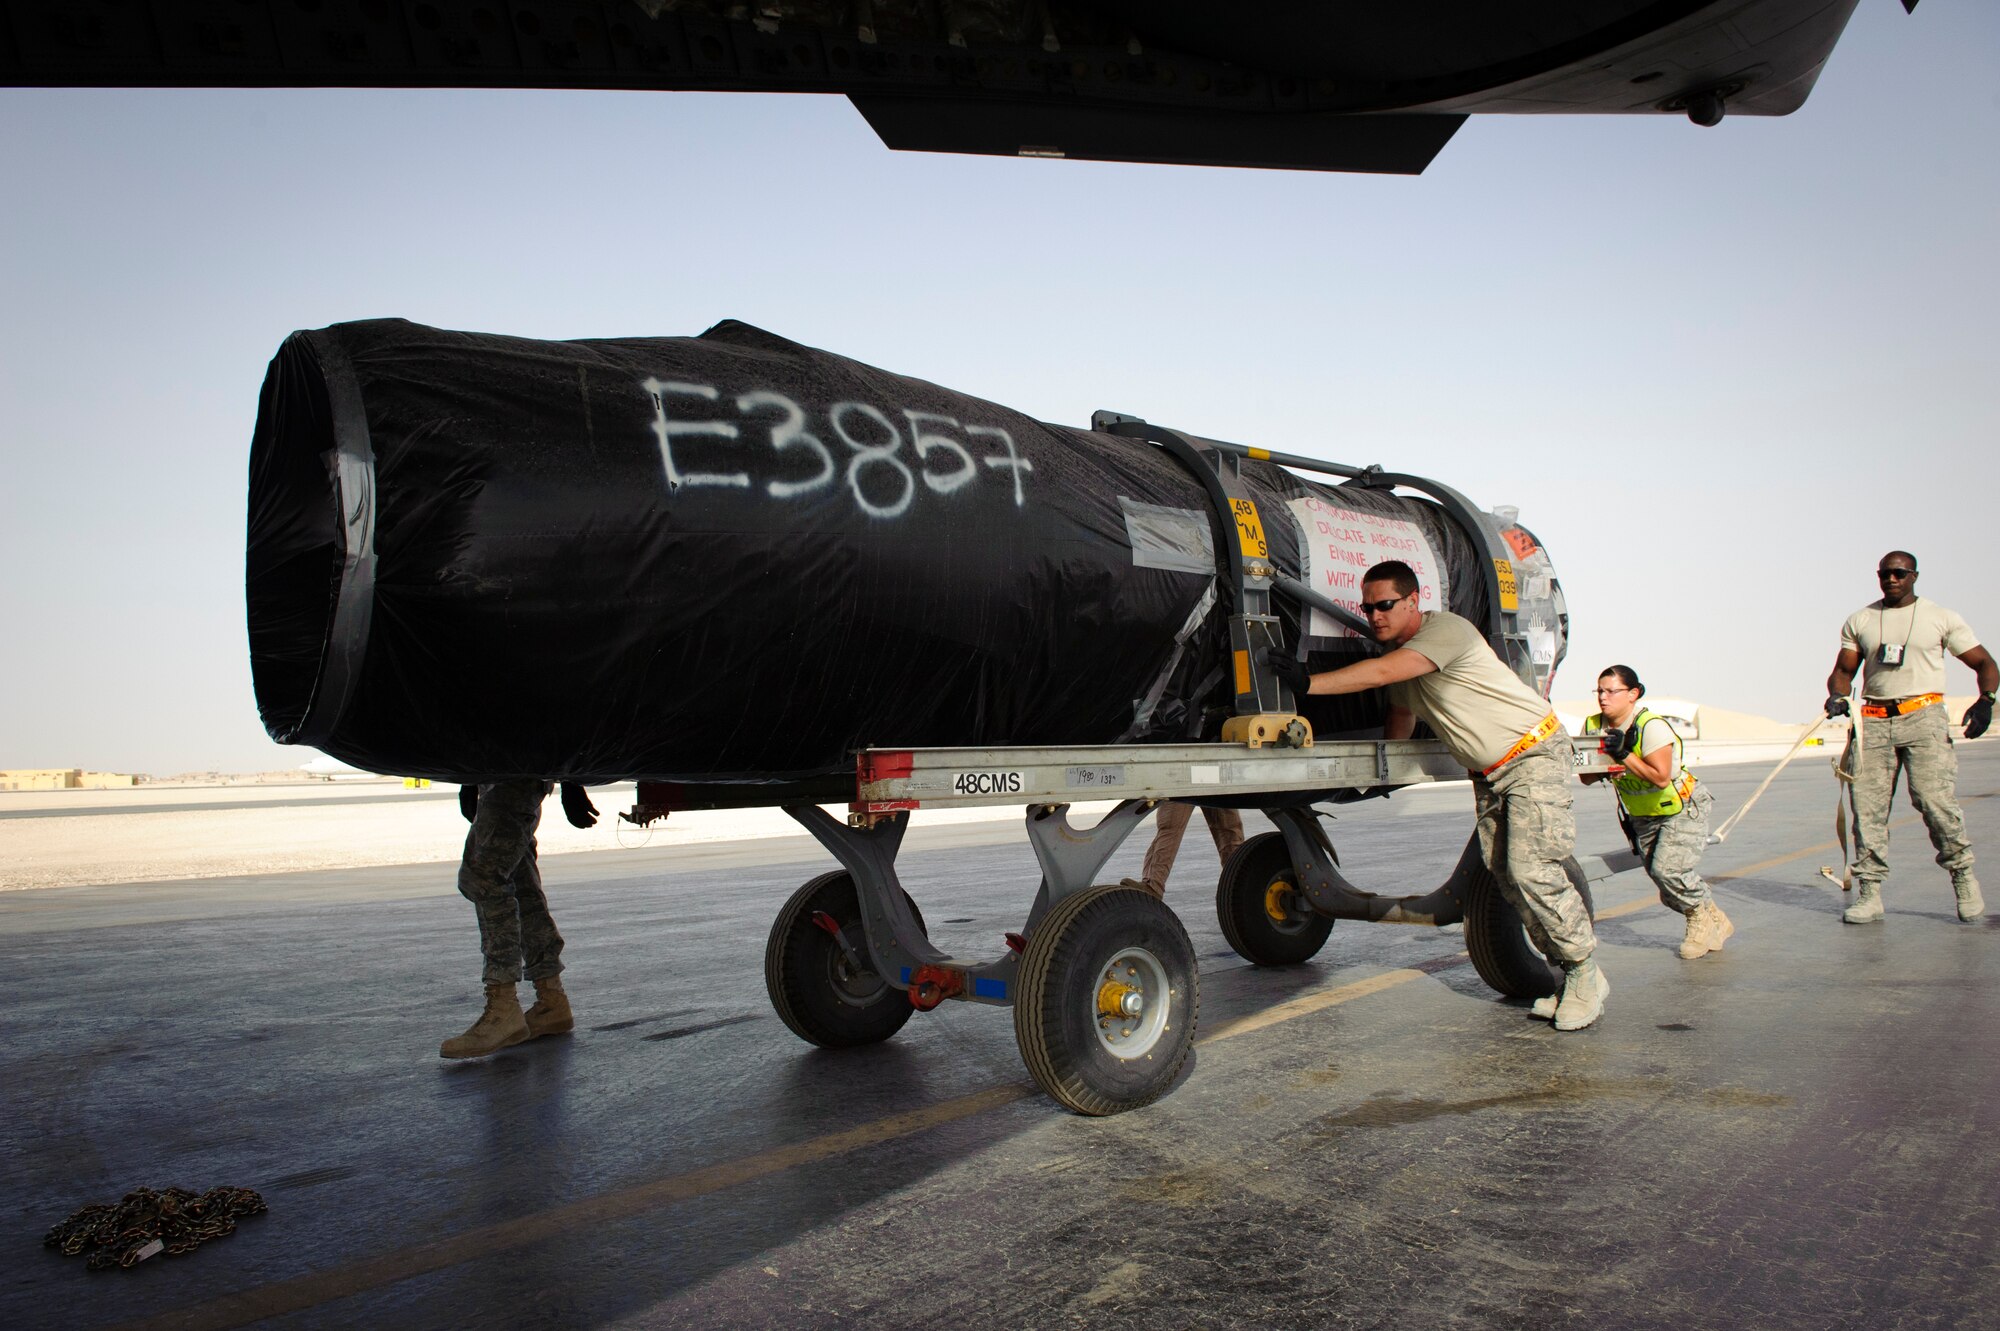 SOUTHWEST ASIA – Airmen from the 8th Expeditionary Air Mobility Squadron push an aircraft engine towards a C-17 Globemaster III for loading here April 25, 2012. (U.S. Air Force photo/Staff Sgt. Nathanael Callon)